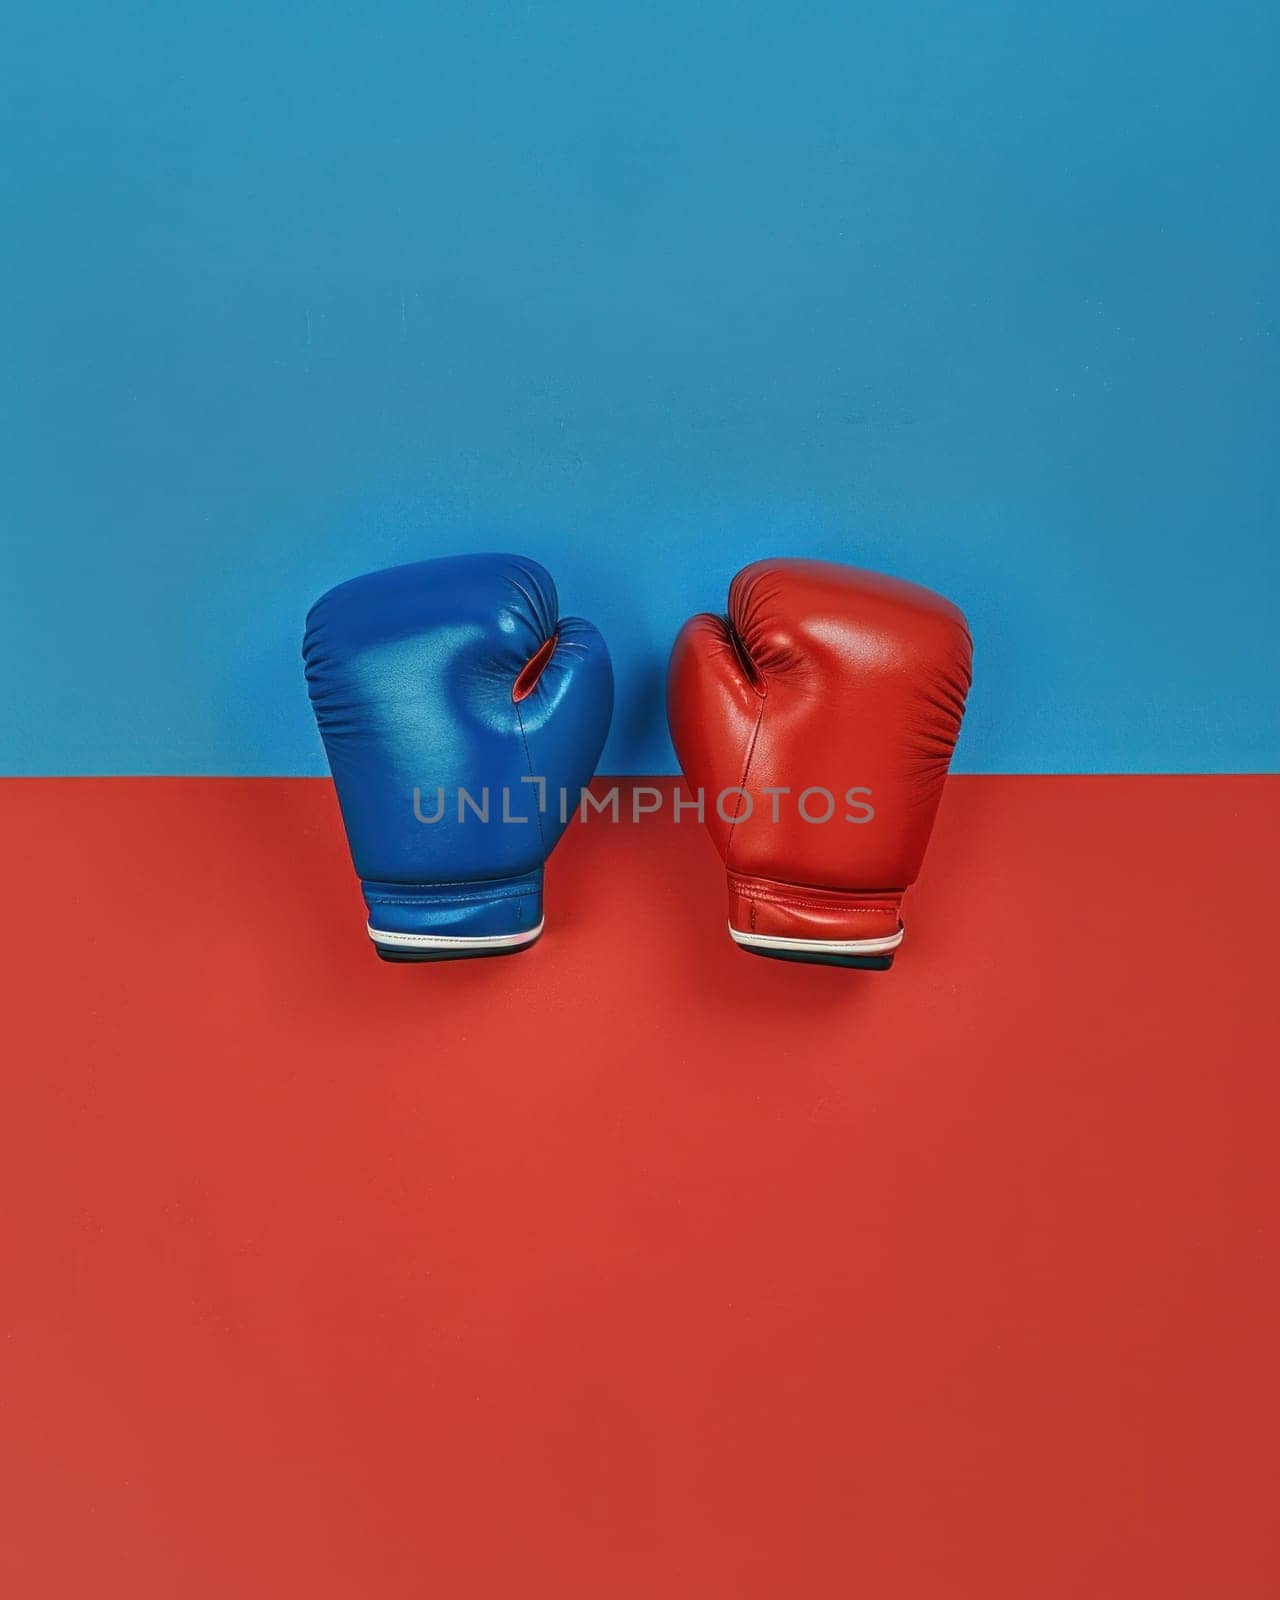 Two red and blue boxing gloves on a colorful background for sports and fitness concept